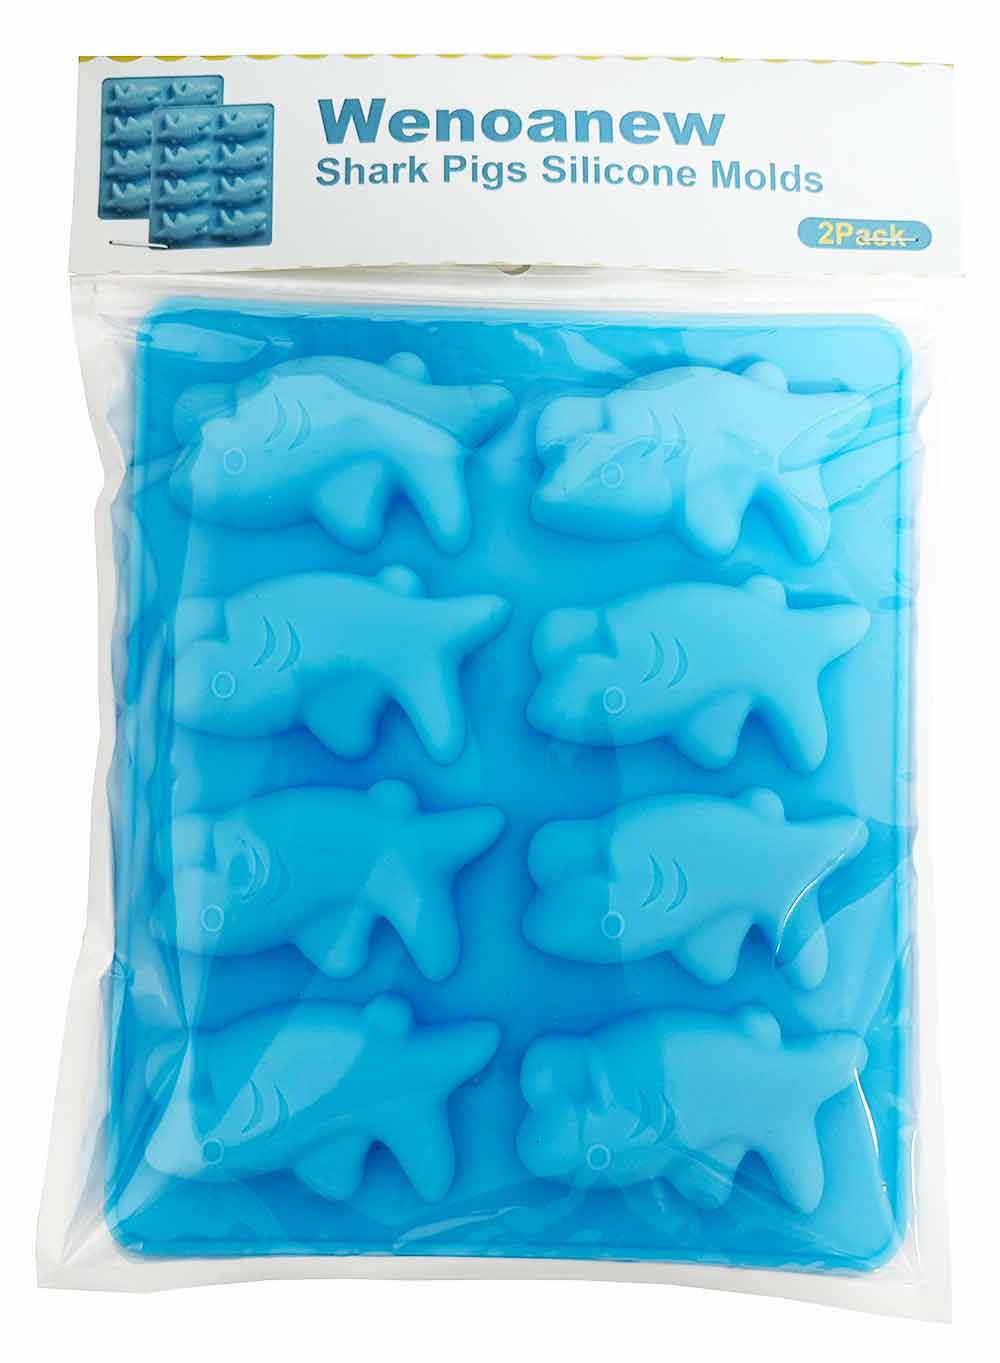 Wenoanew Shark Pigs In A Blanket Cookie Mold Shark Bites or Pigs Ice Cube Molds Silicone Molds (2 Pack)